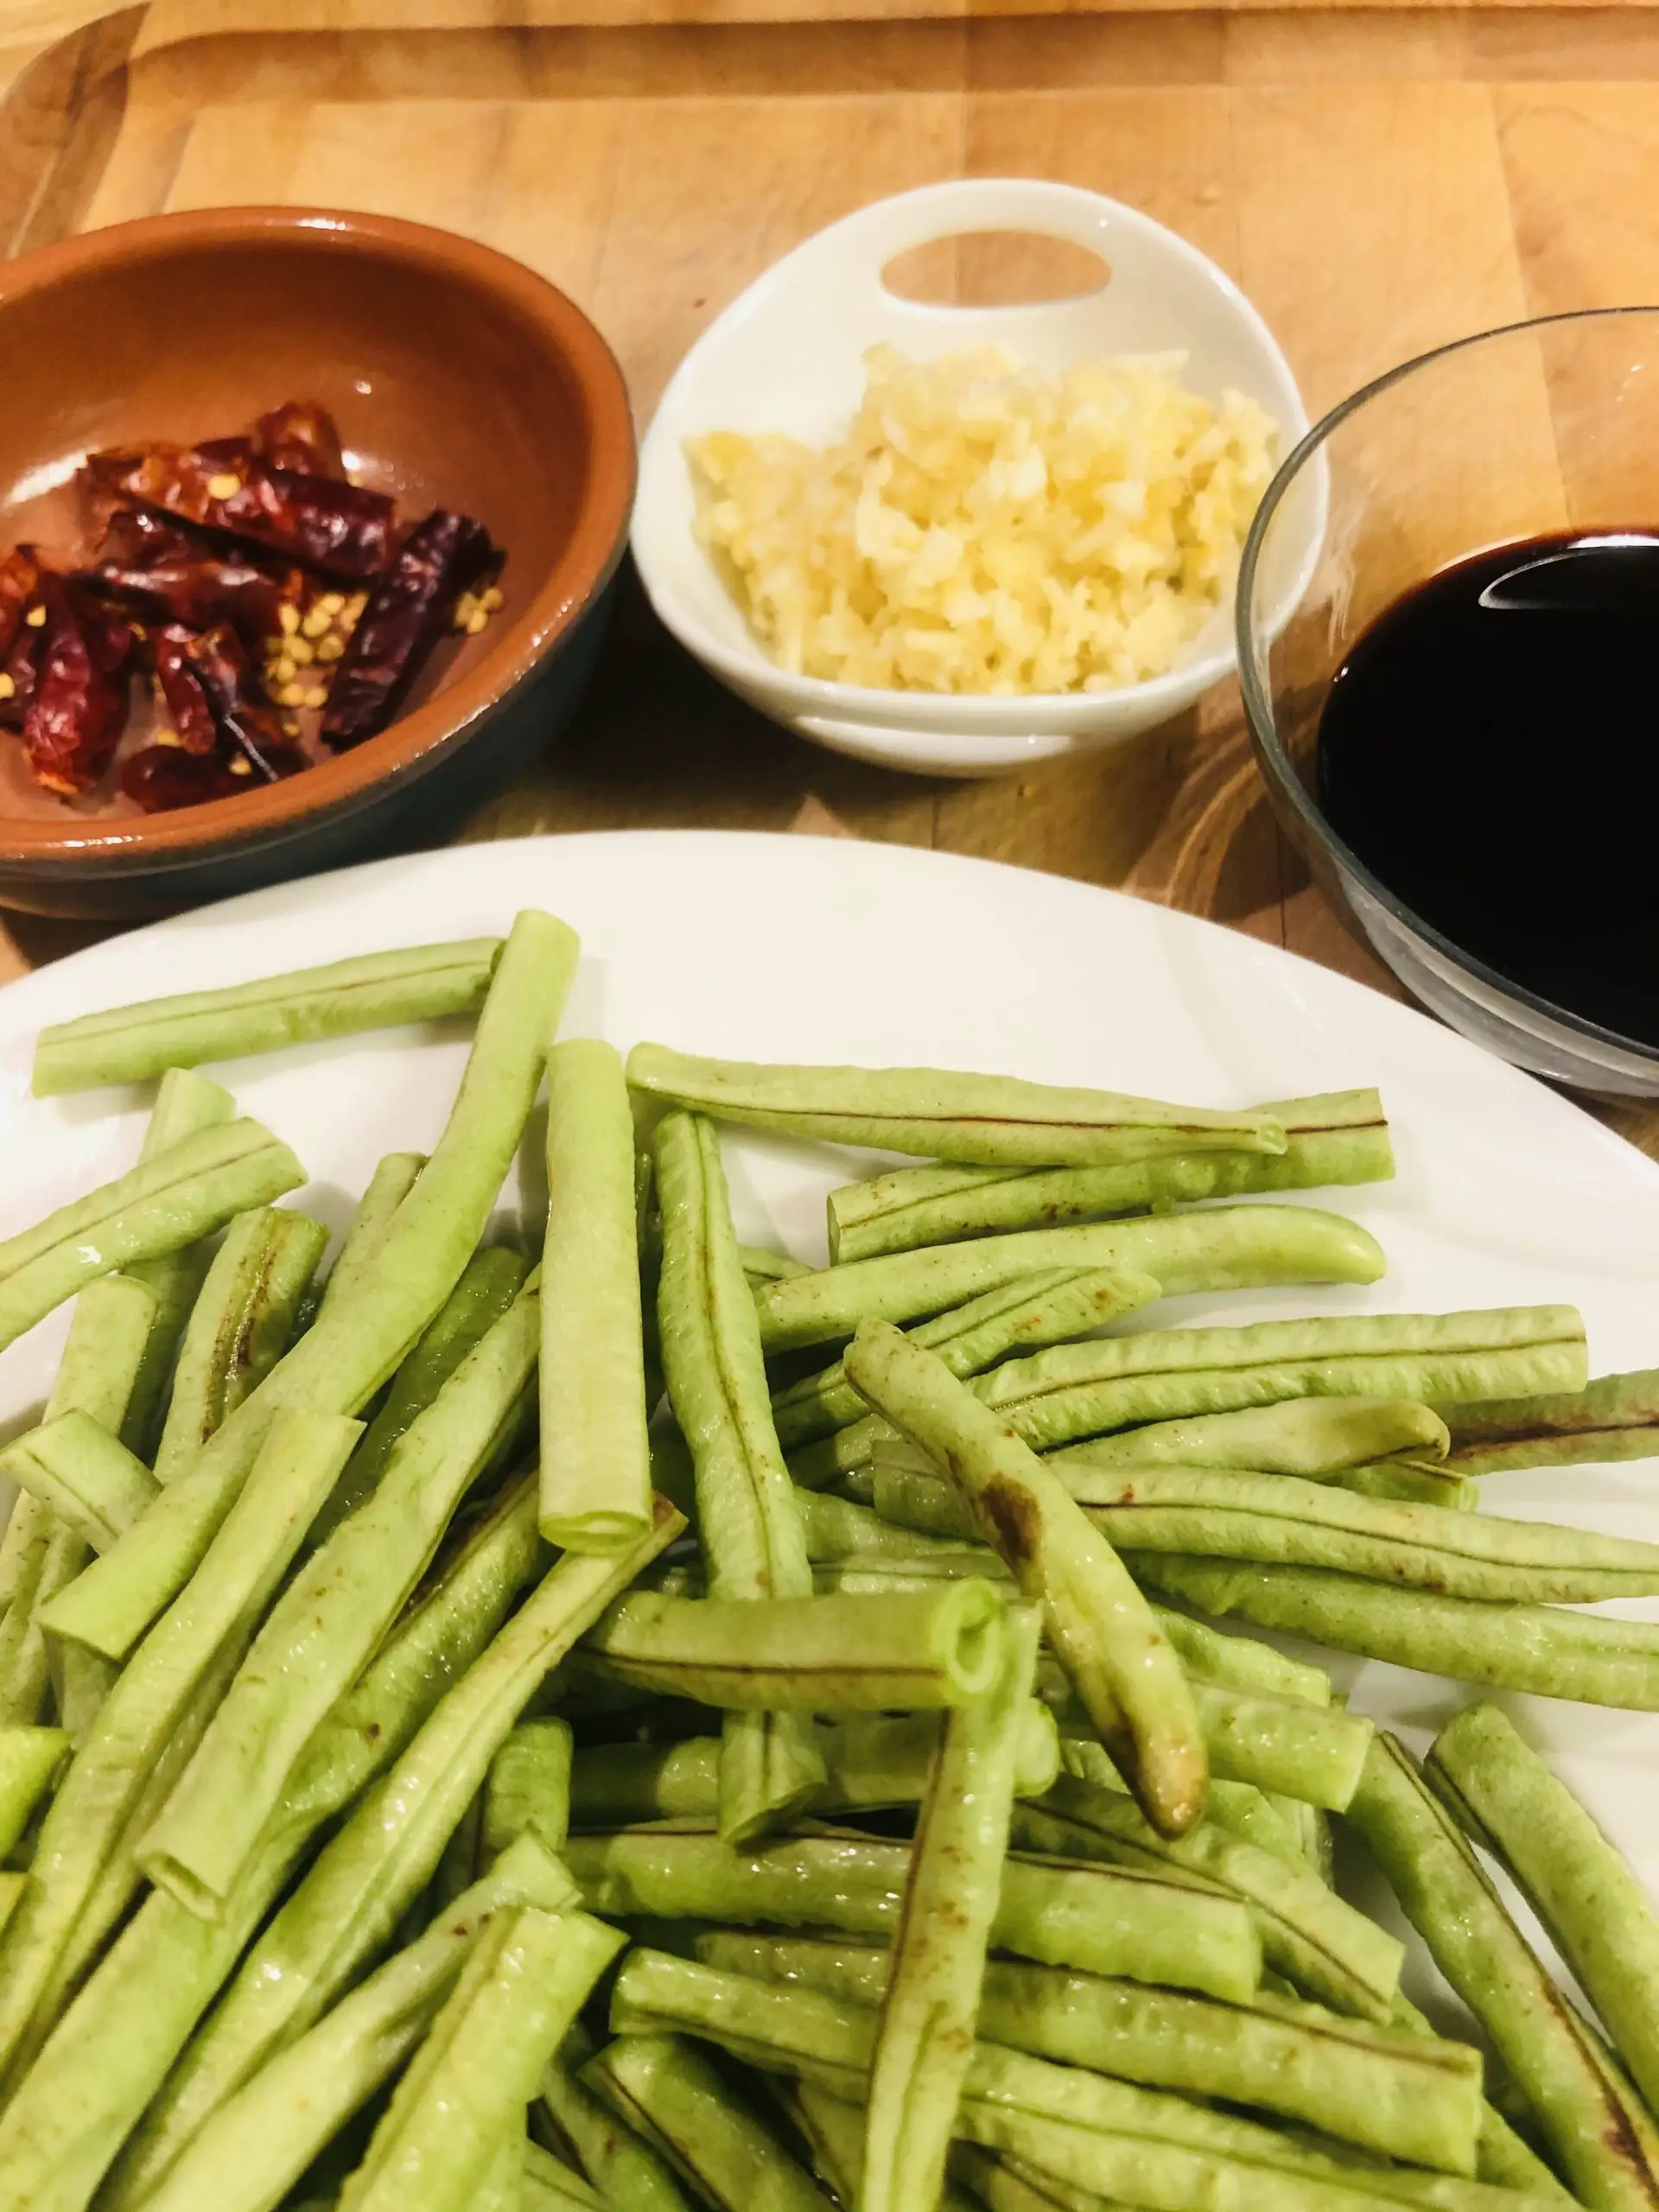 Chinese long beans cut into 3 inch pieces on a white plate, ground up Sichuan peppercorn in a small bowl, minced ginger and garlic in a small bowl, and a glass bowl with soy sauce and shaoxing rice wine